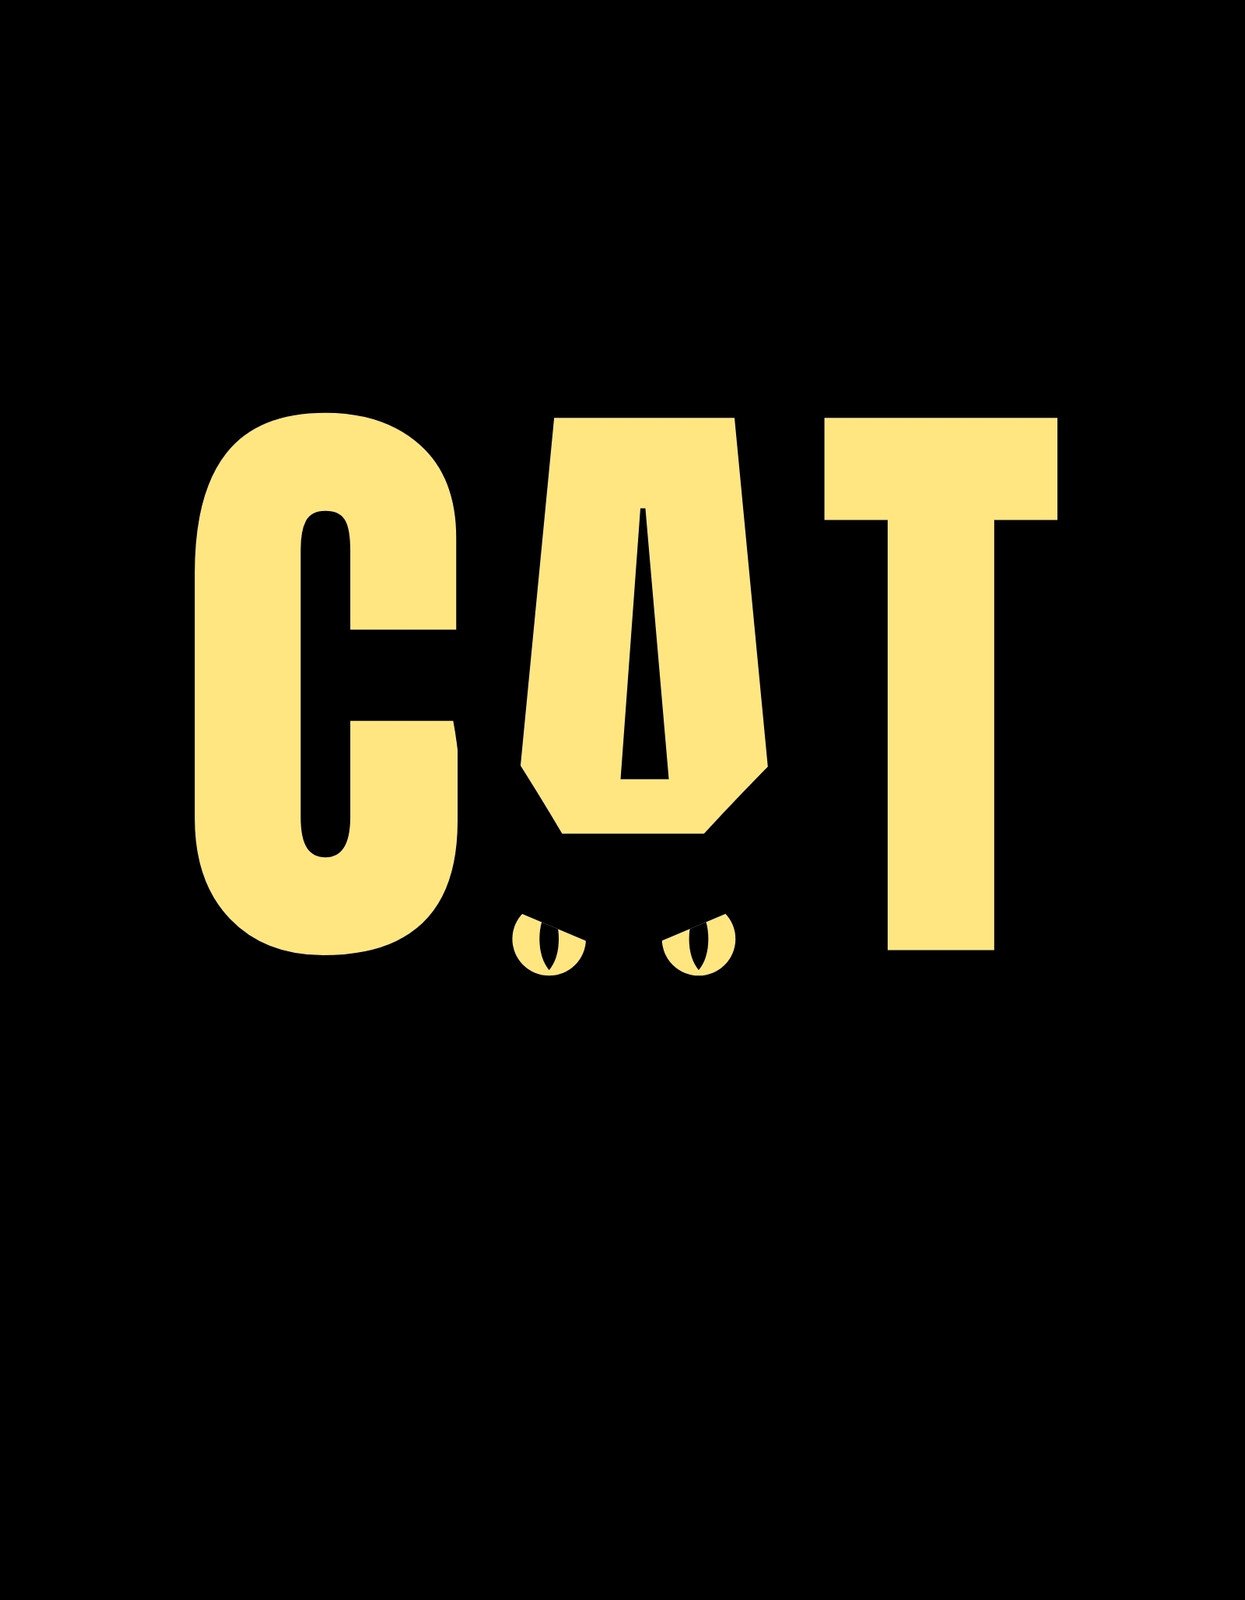 Free cat T-shirt templates to customize and print